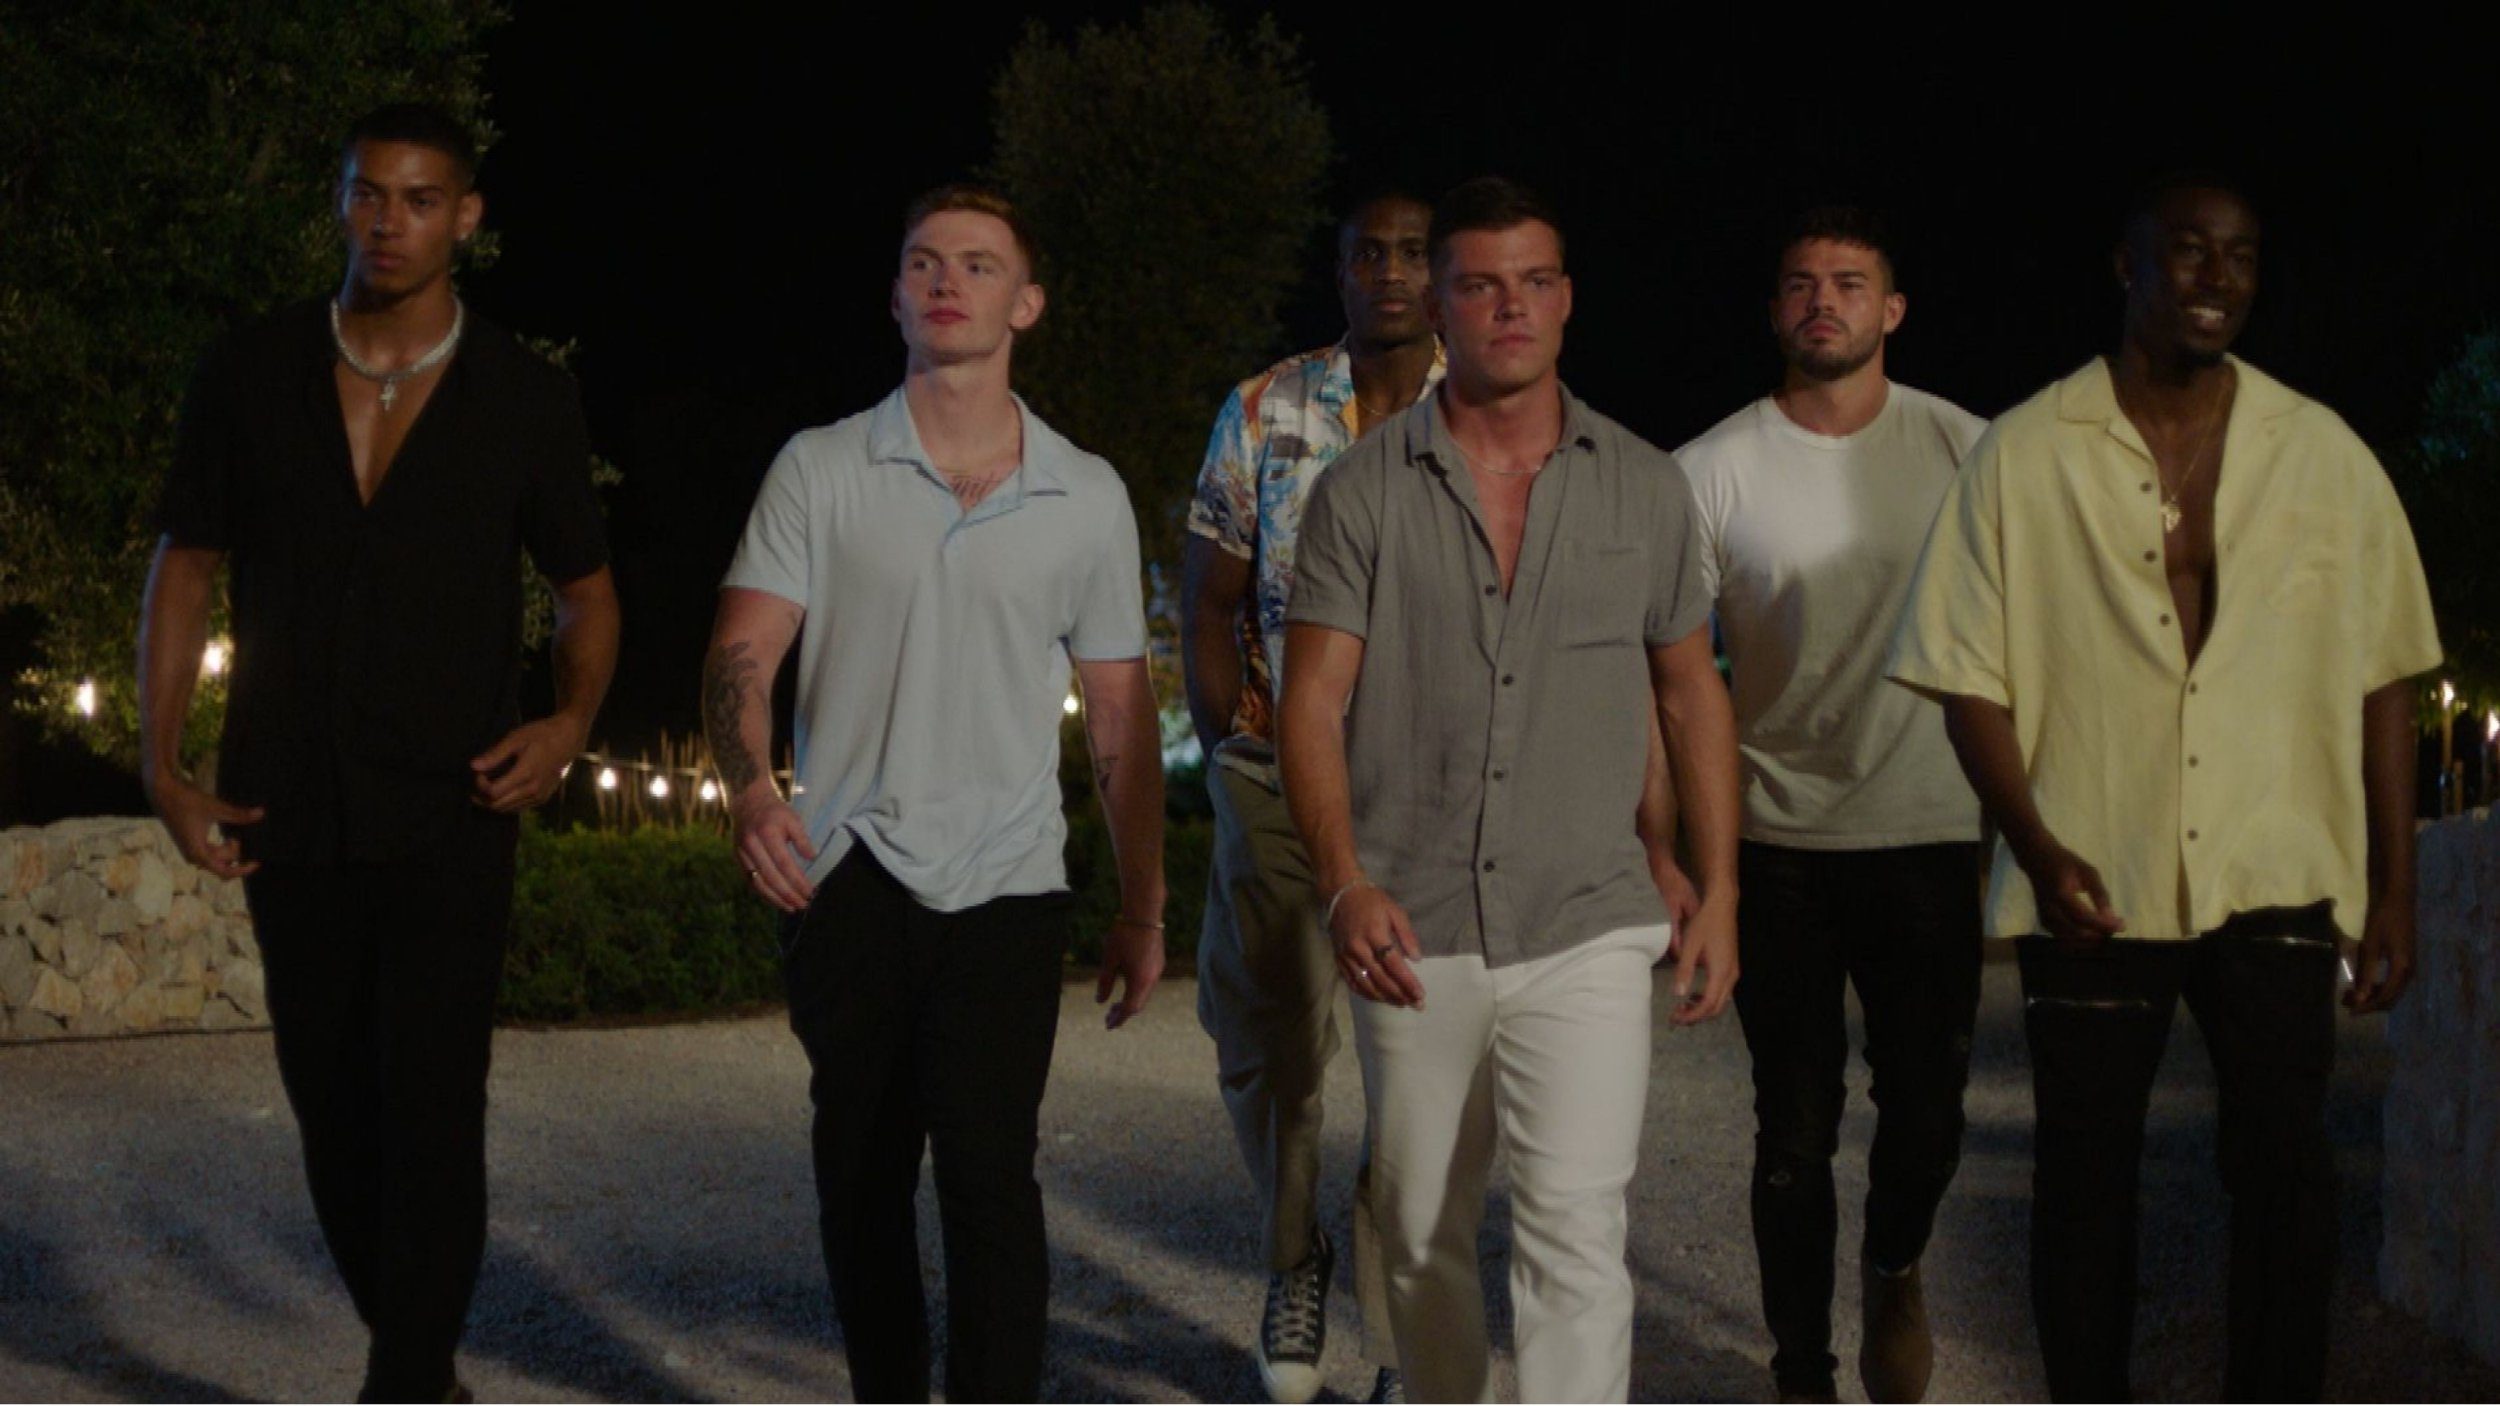 Love Island 2022: How does Casa Amor work for the new contestants?